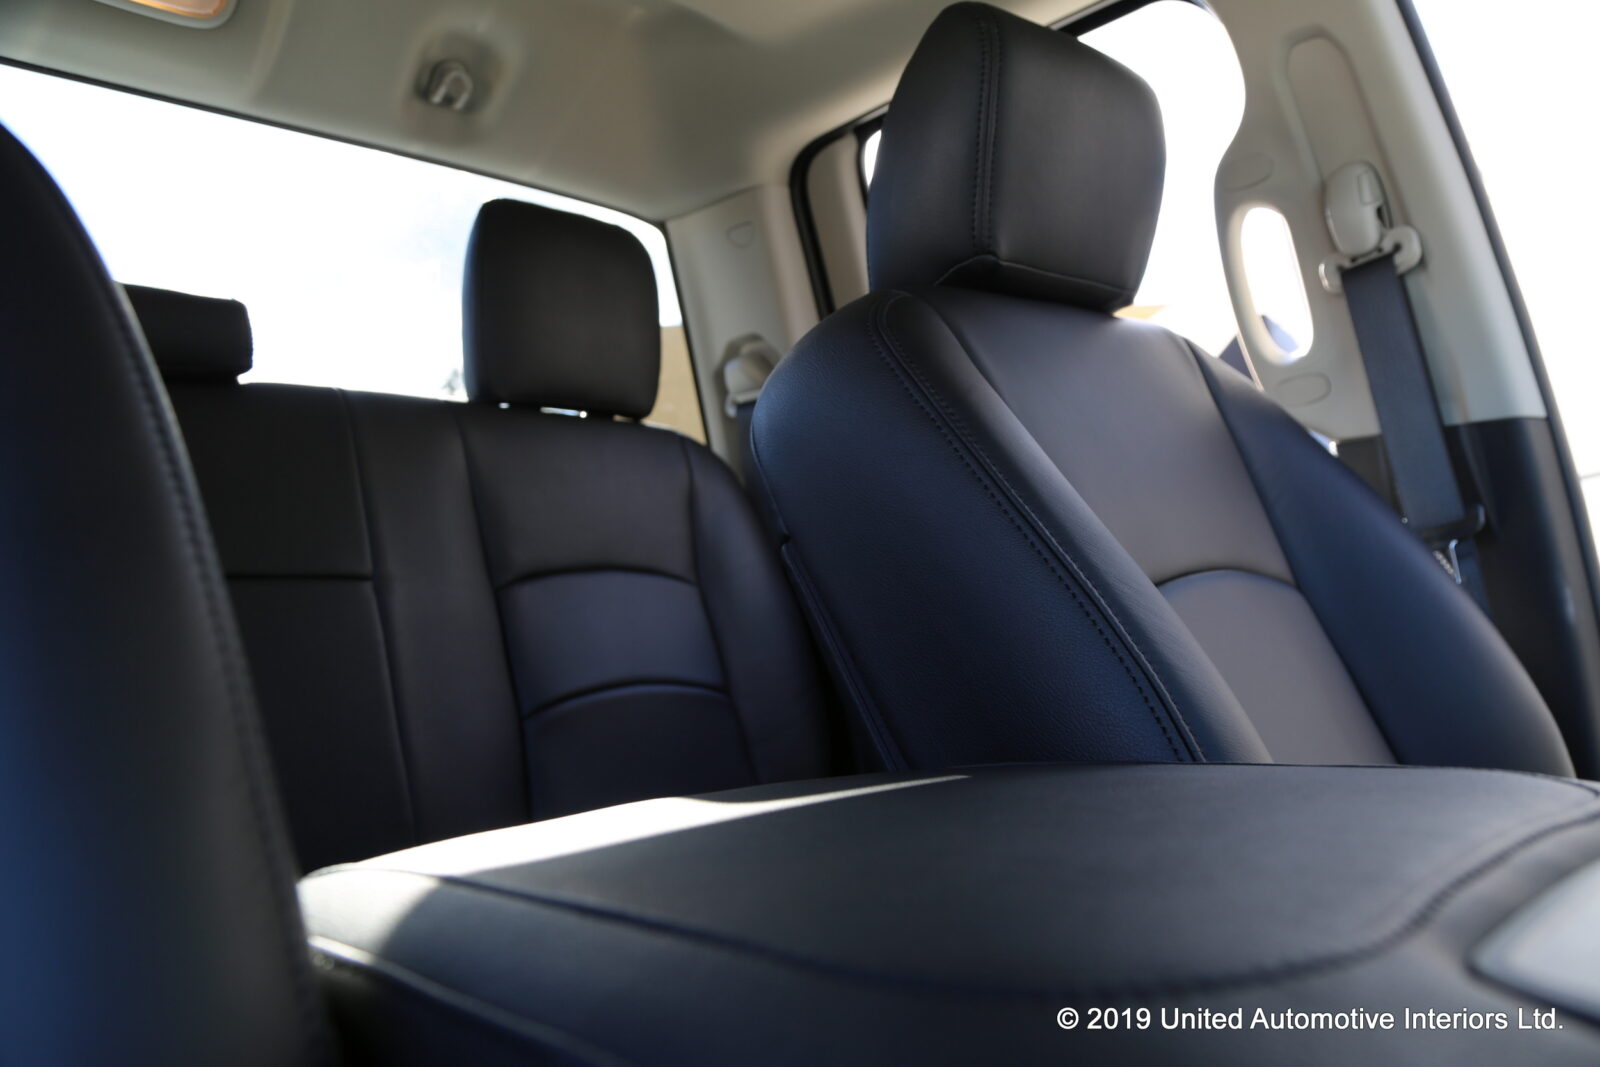 Ford F-150 Leather Interior Upholstery - LeatherSeats.com